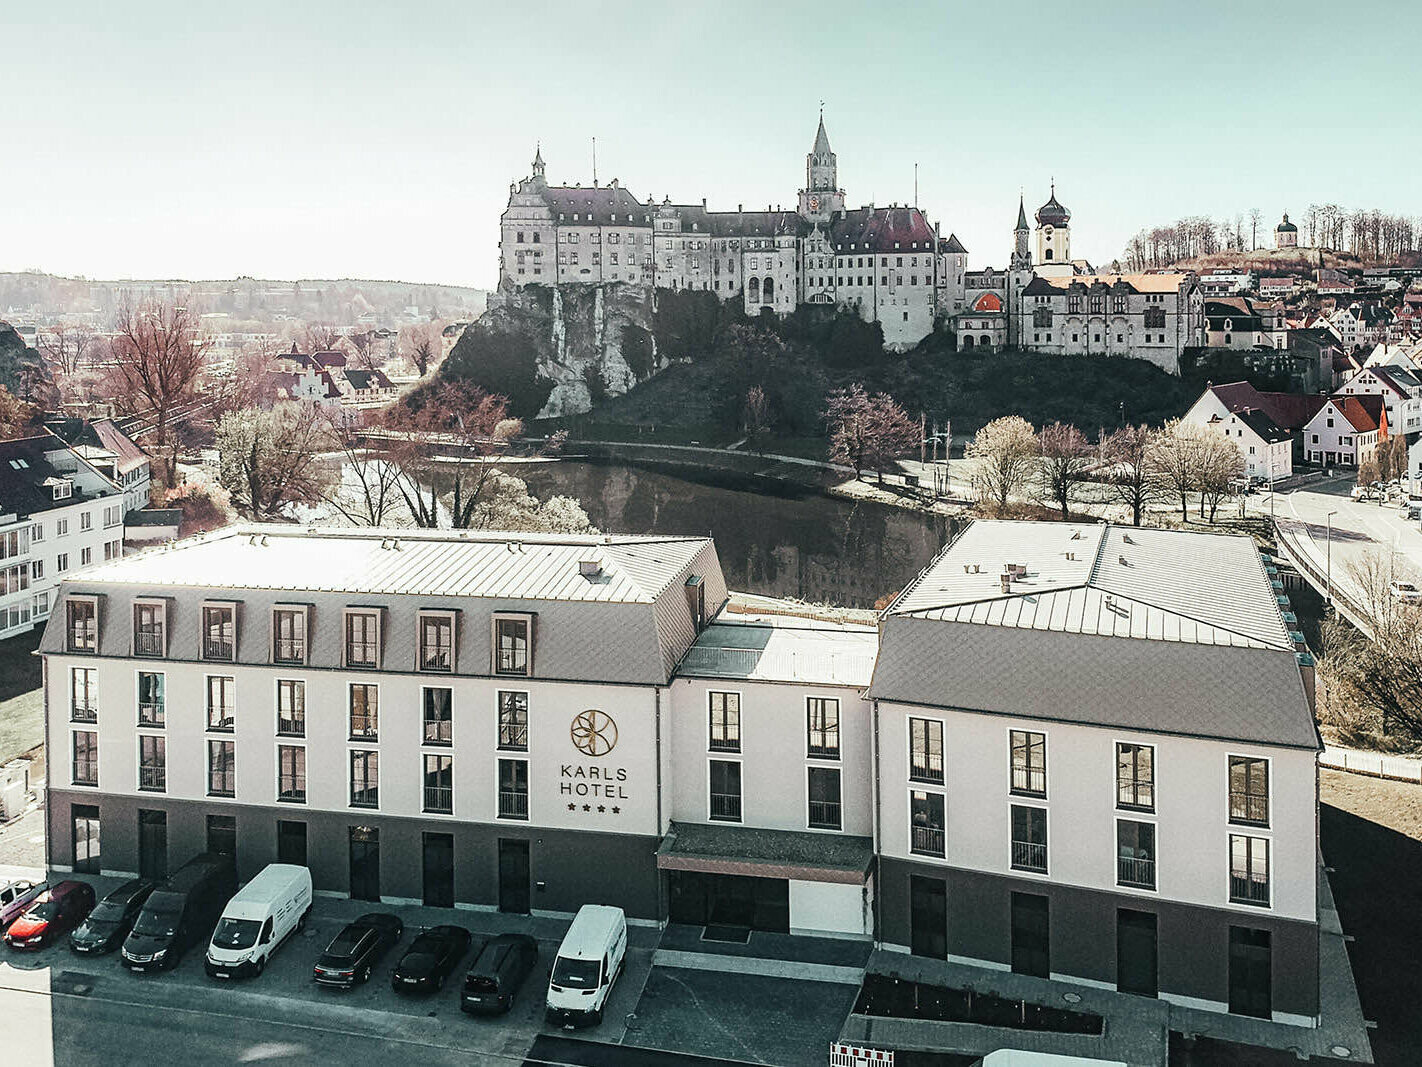 The front view from above of the Karls Hotel looking towards the Danube Sigmaringen Castle.